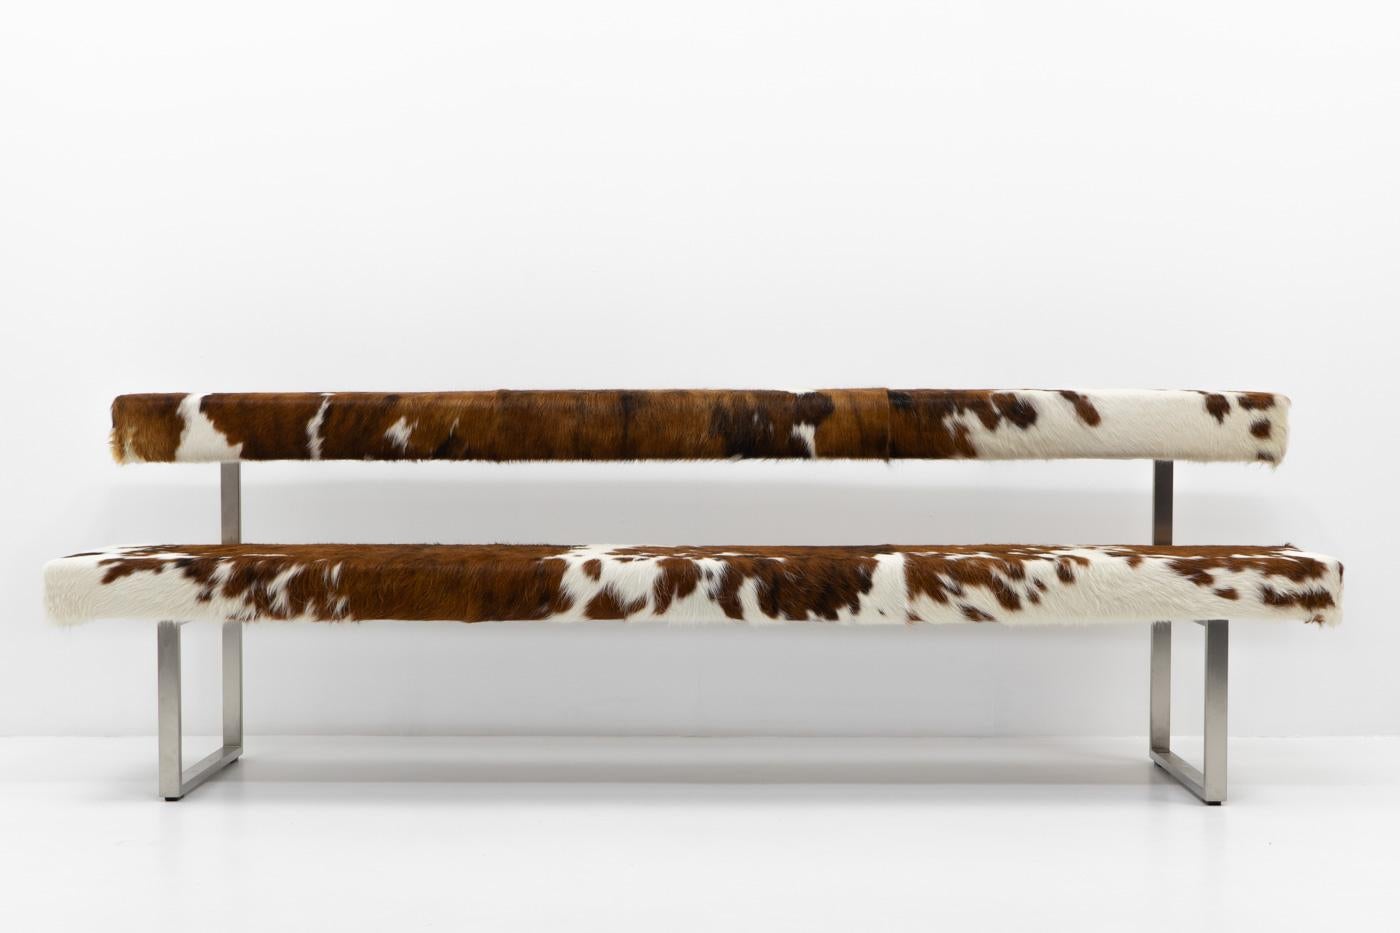 Steel Swiss Design Permesso Bench in cowhide, by Girsberger - 2000s For Sale